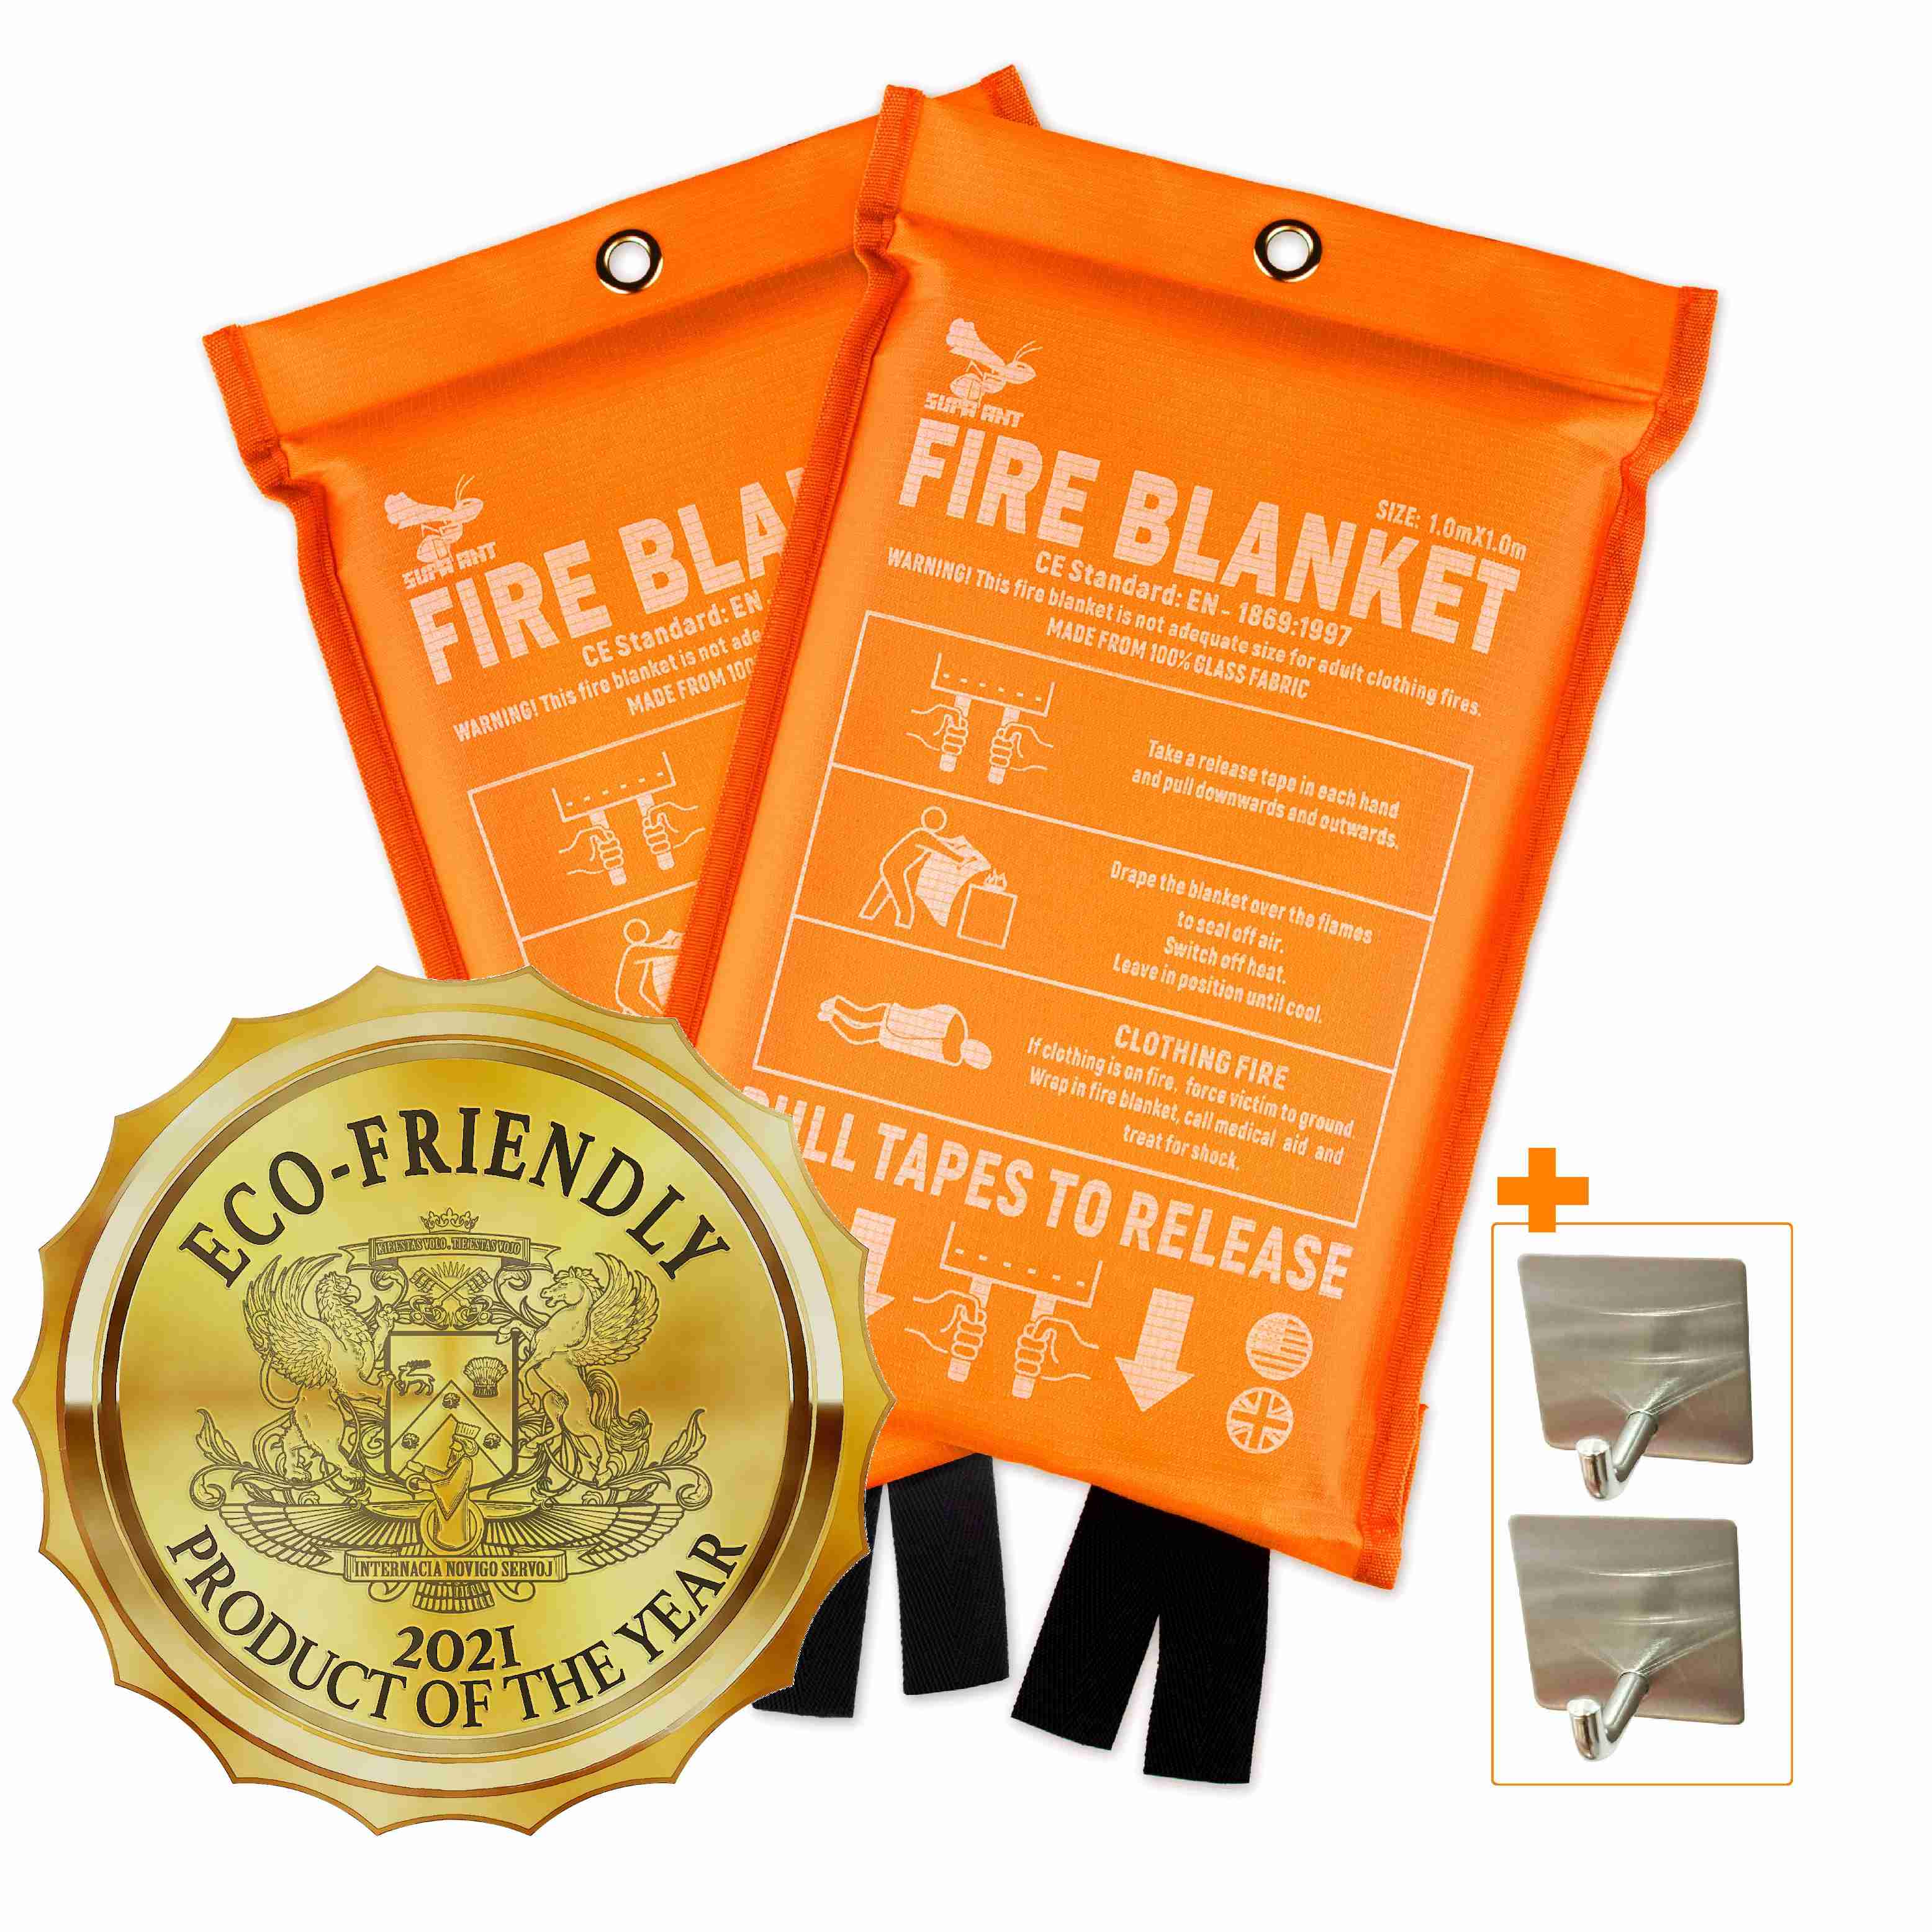 fire-blanket-by-Supa-Ant with cash back rebate